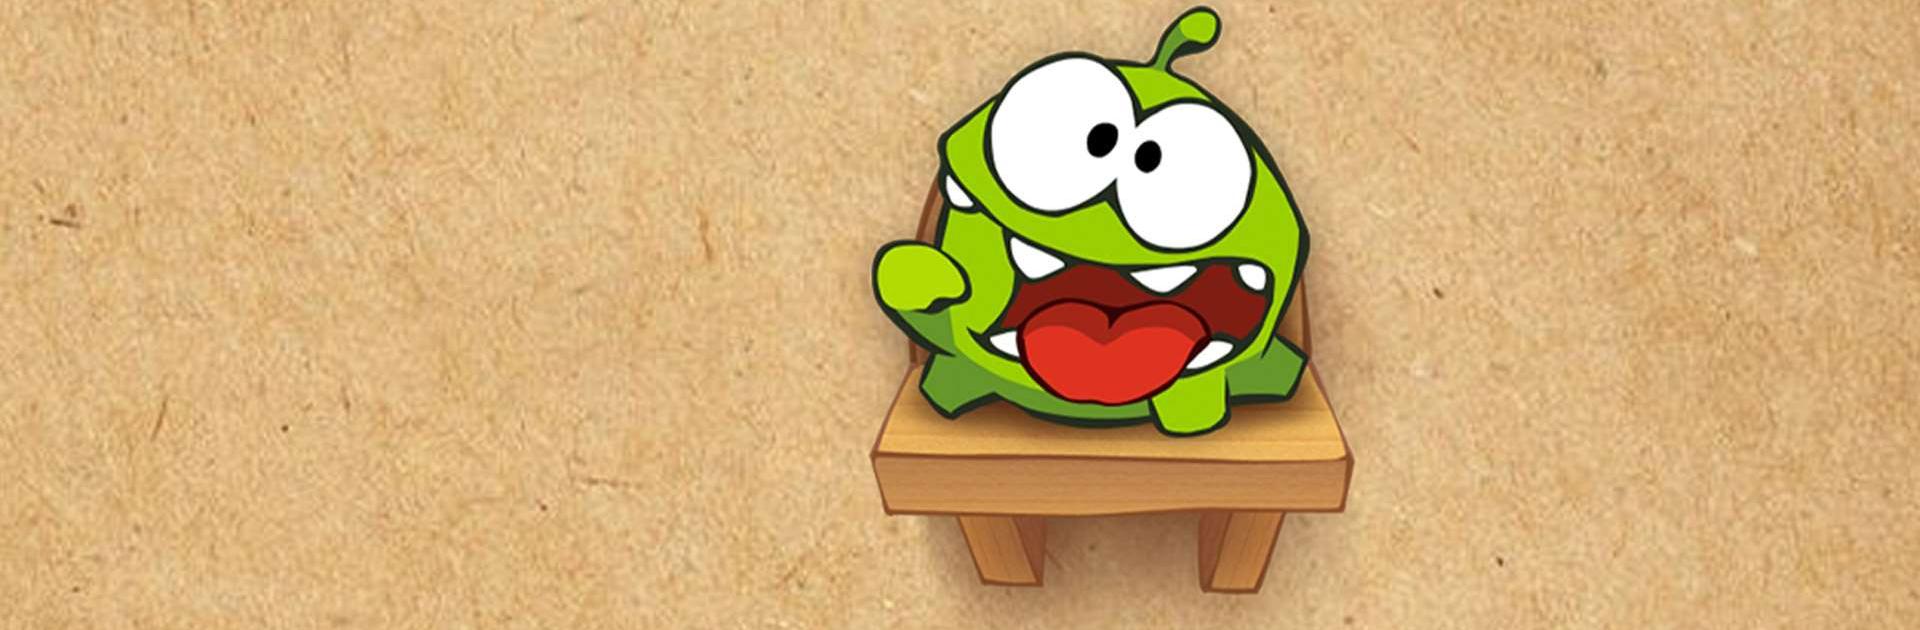 Cut the Rope & Om Nom - Sweet! Dragon update for Cut the Rope